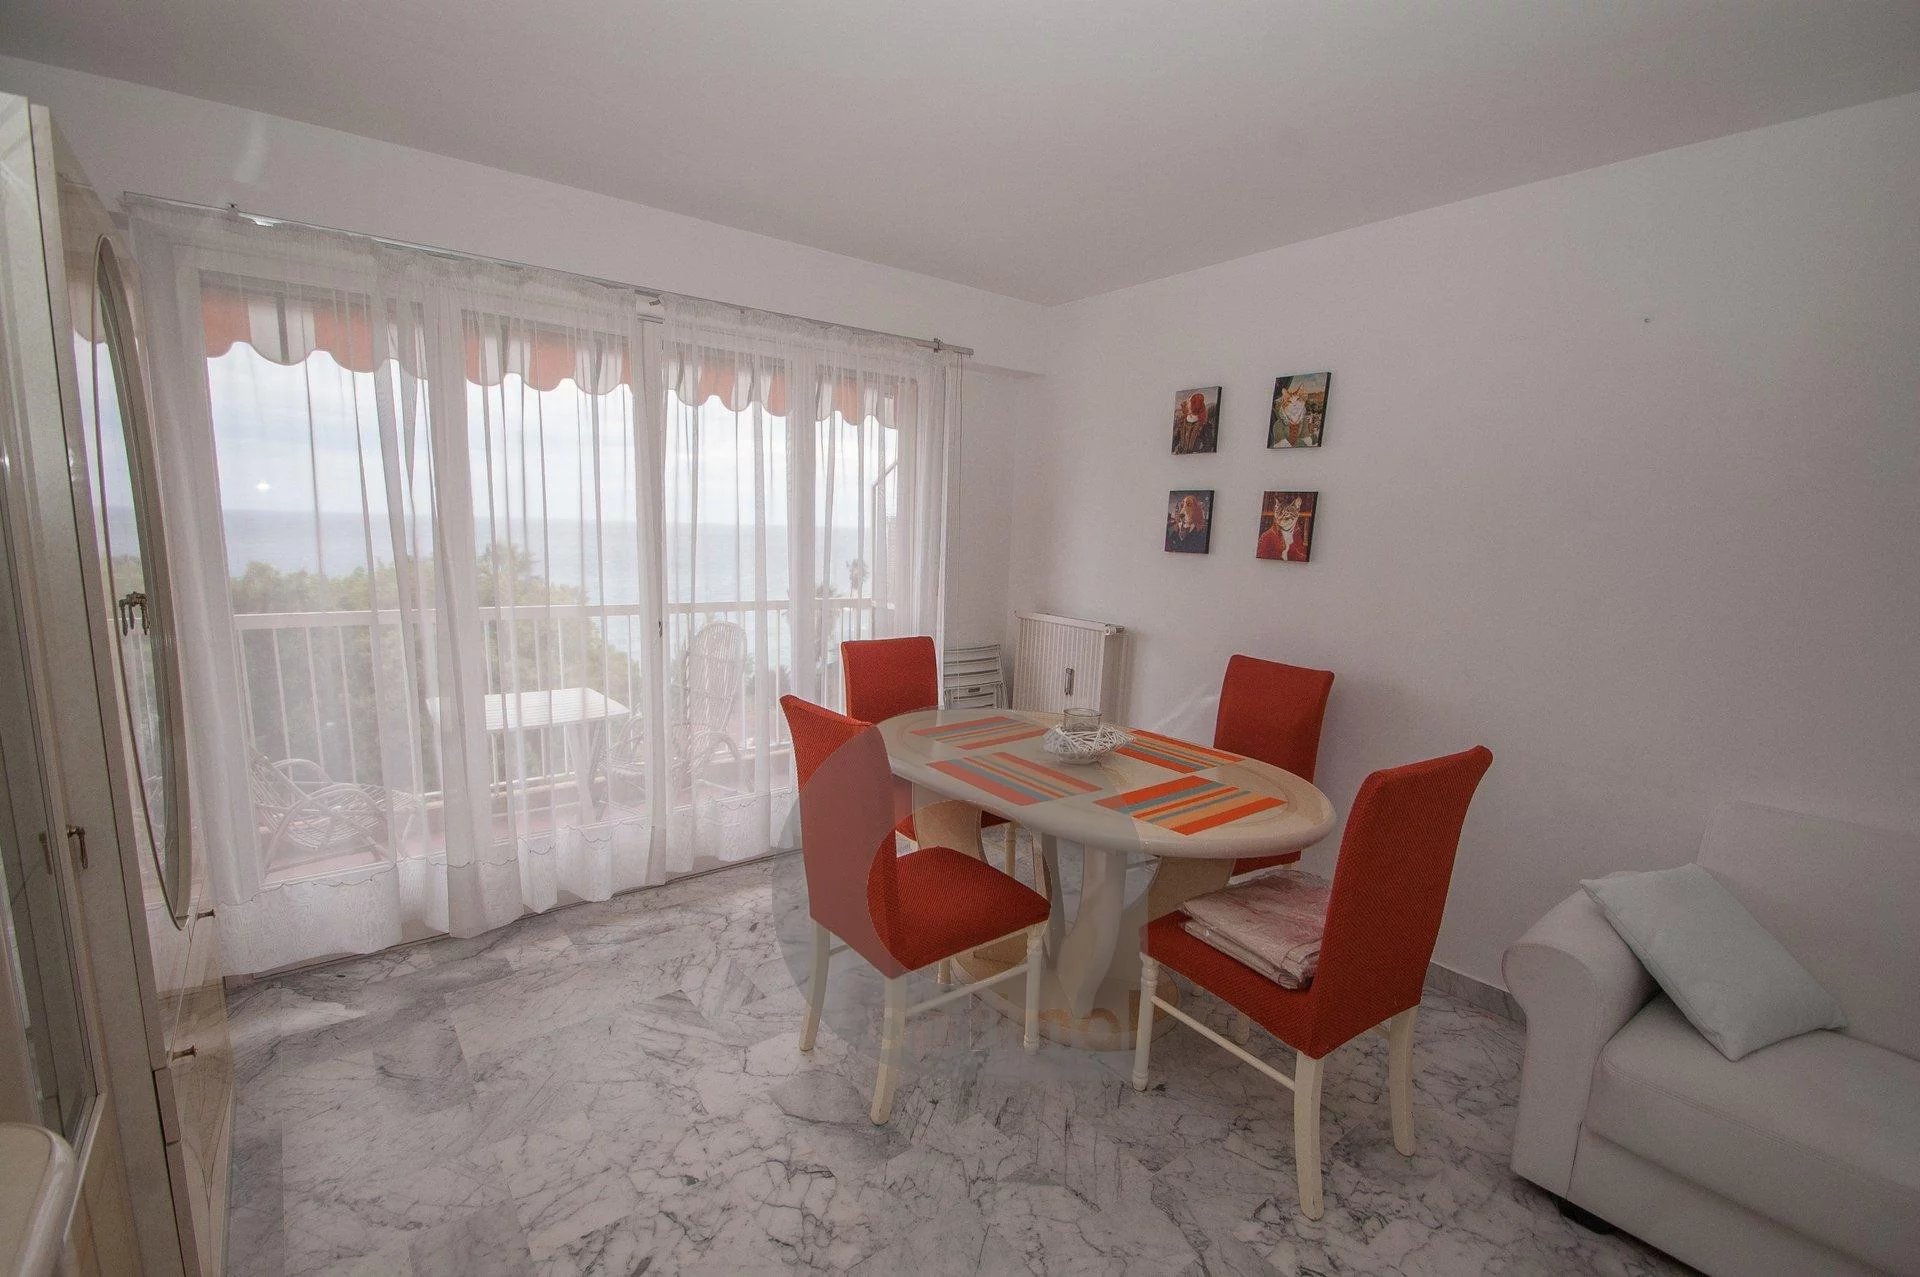 2rooms for 5 persons in front of the sea with parking lot and terrace in quiet place